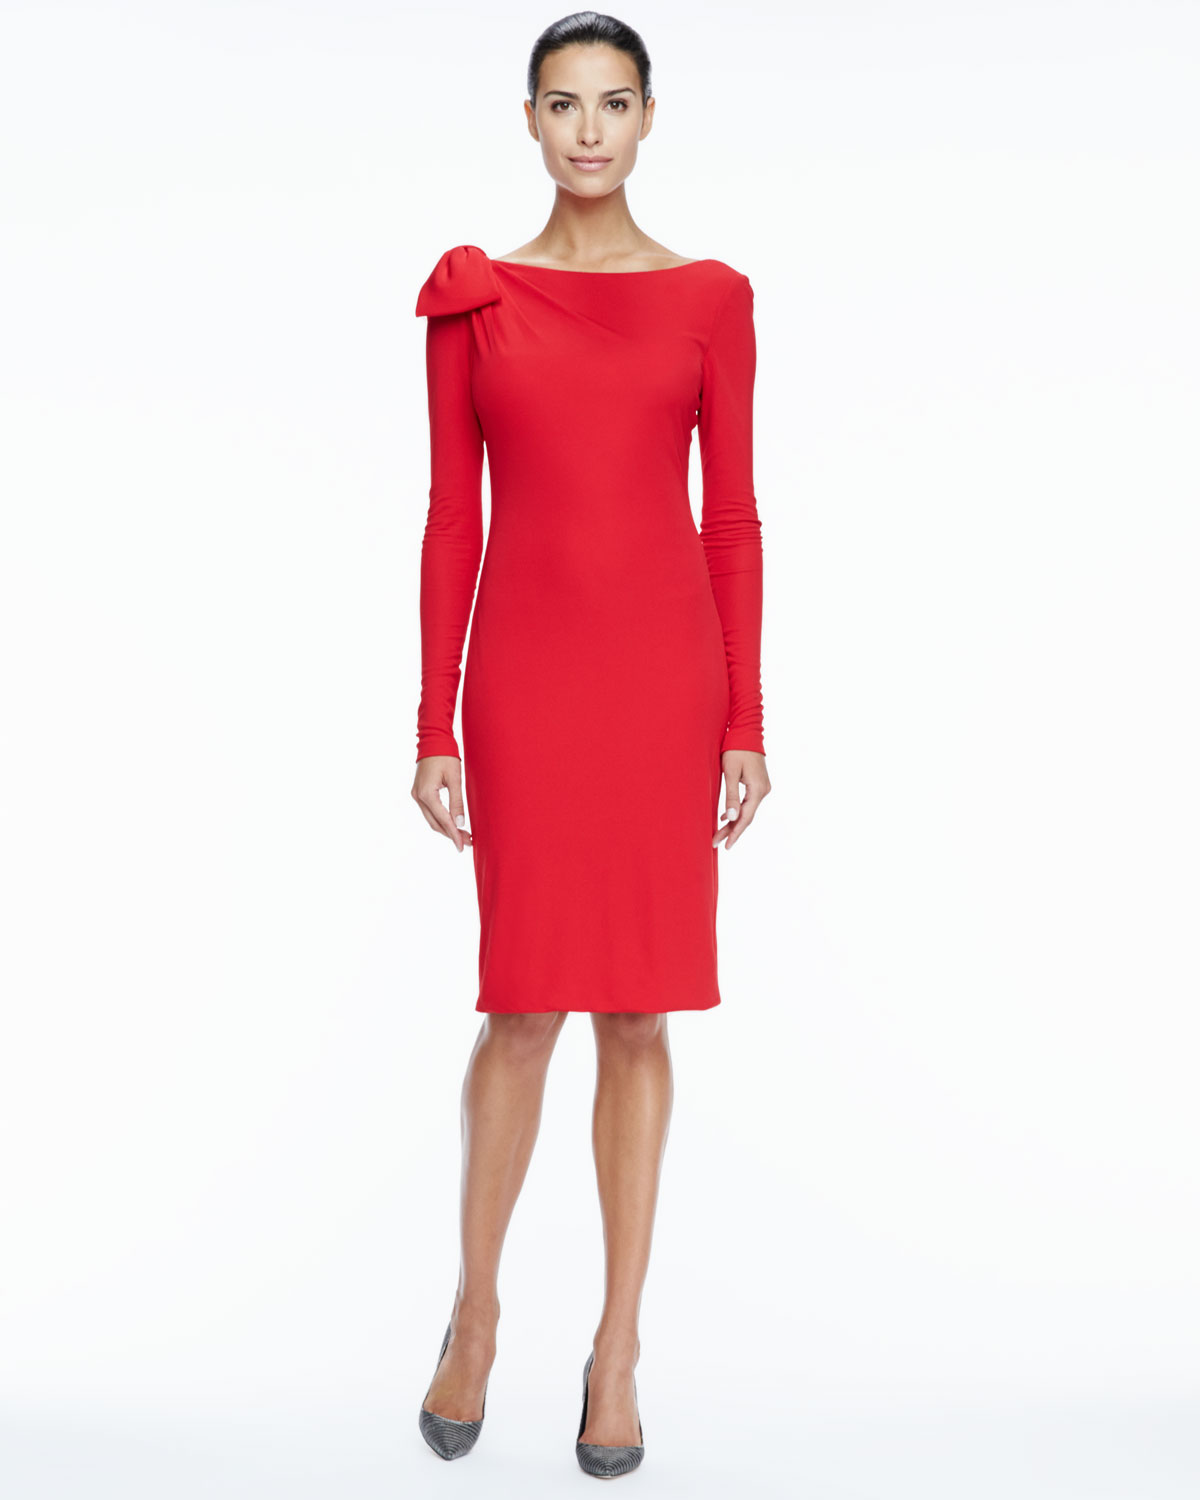 Lyst - Badgley Mischka Longsleeve Bowdetail Cocktail Dress in Red